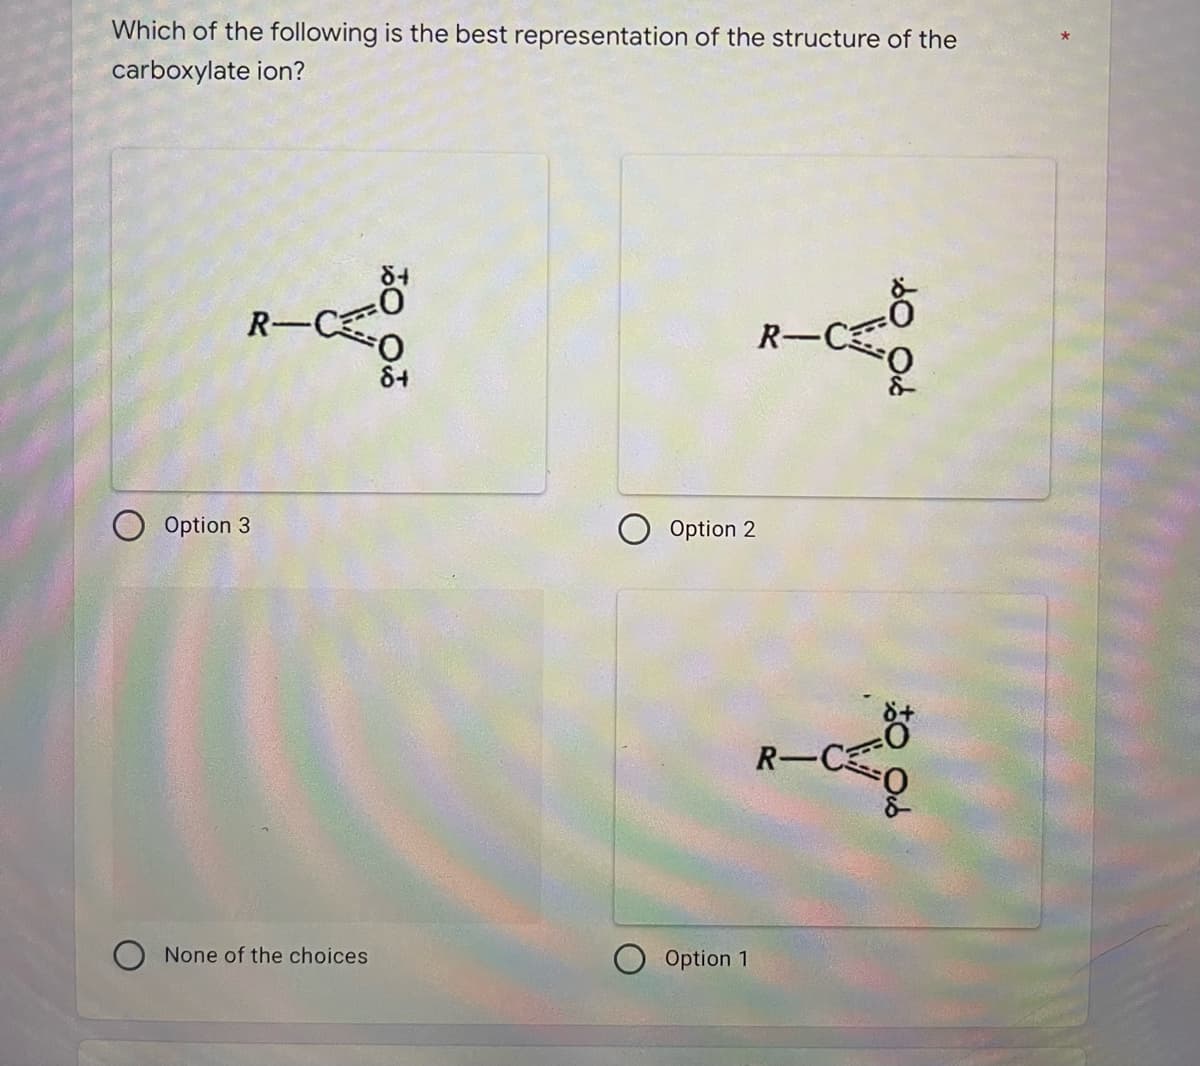 Which of the following is the best representation of the structure of the
carboxylate ion?
R-C
R-C
O Option 3
Option 2
R-C
O None of the choices
Option 1
